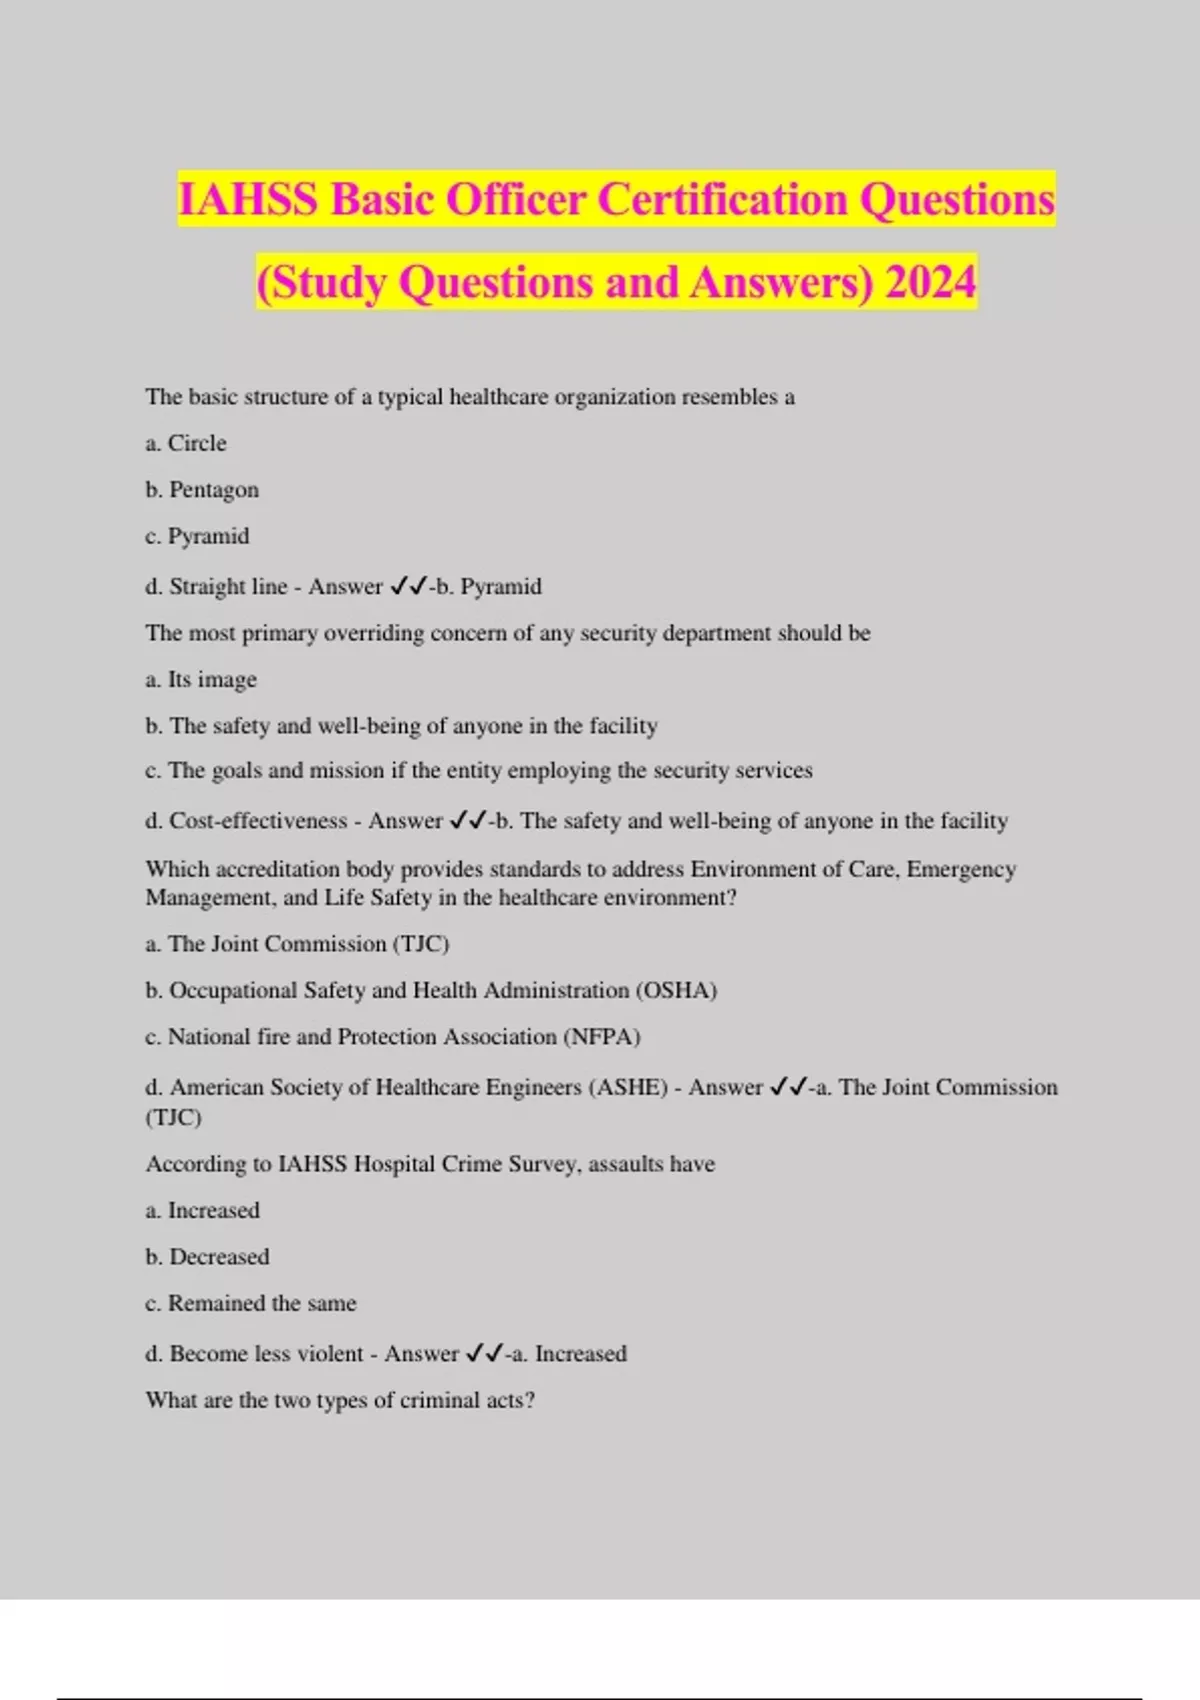 IAHSS Basic Officer Certification Questions (Study Questions and